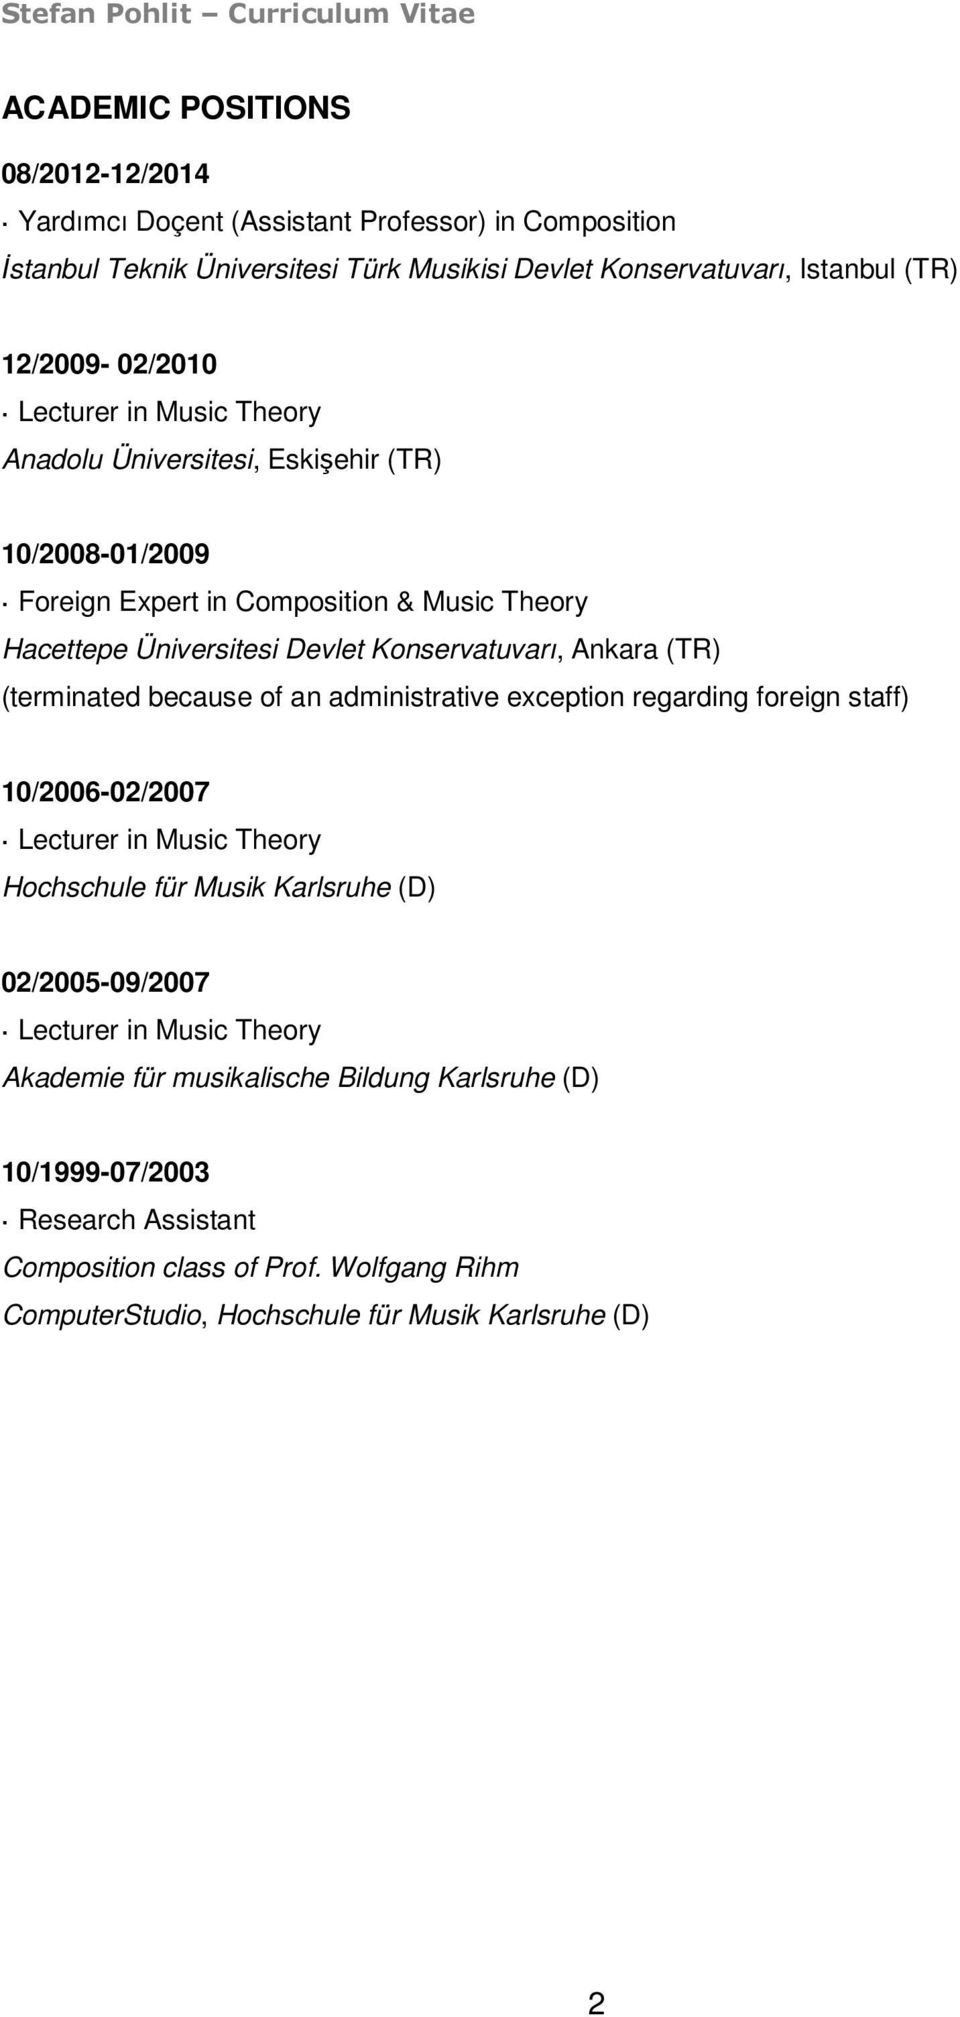 (terminated because of an administrative exception regarding foreign staff) 10/2006-02/2007 Lecturer in Music Theory Hochschule für Musik Karlsruhe (D) 02/2005-09/2007 Lecturer in